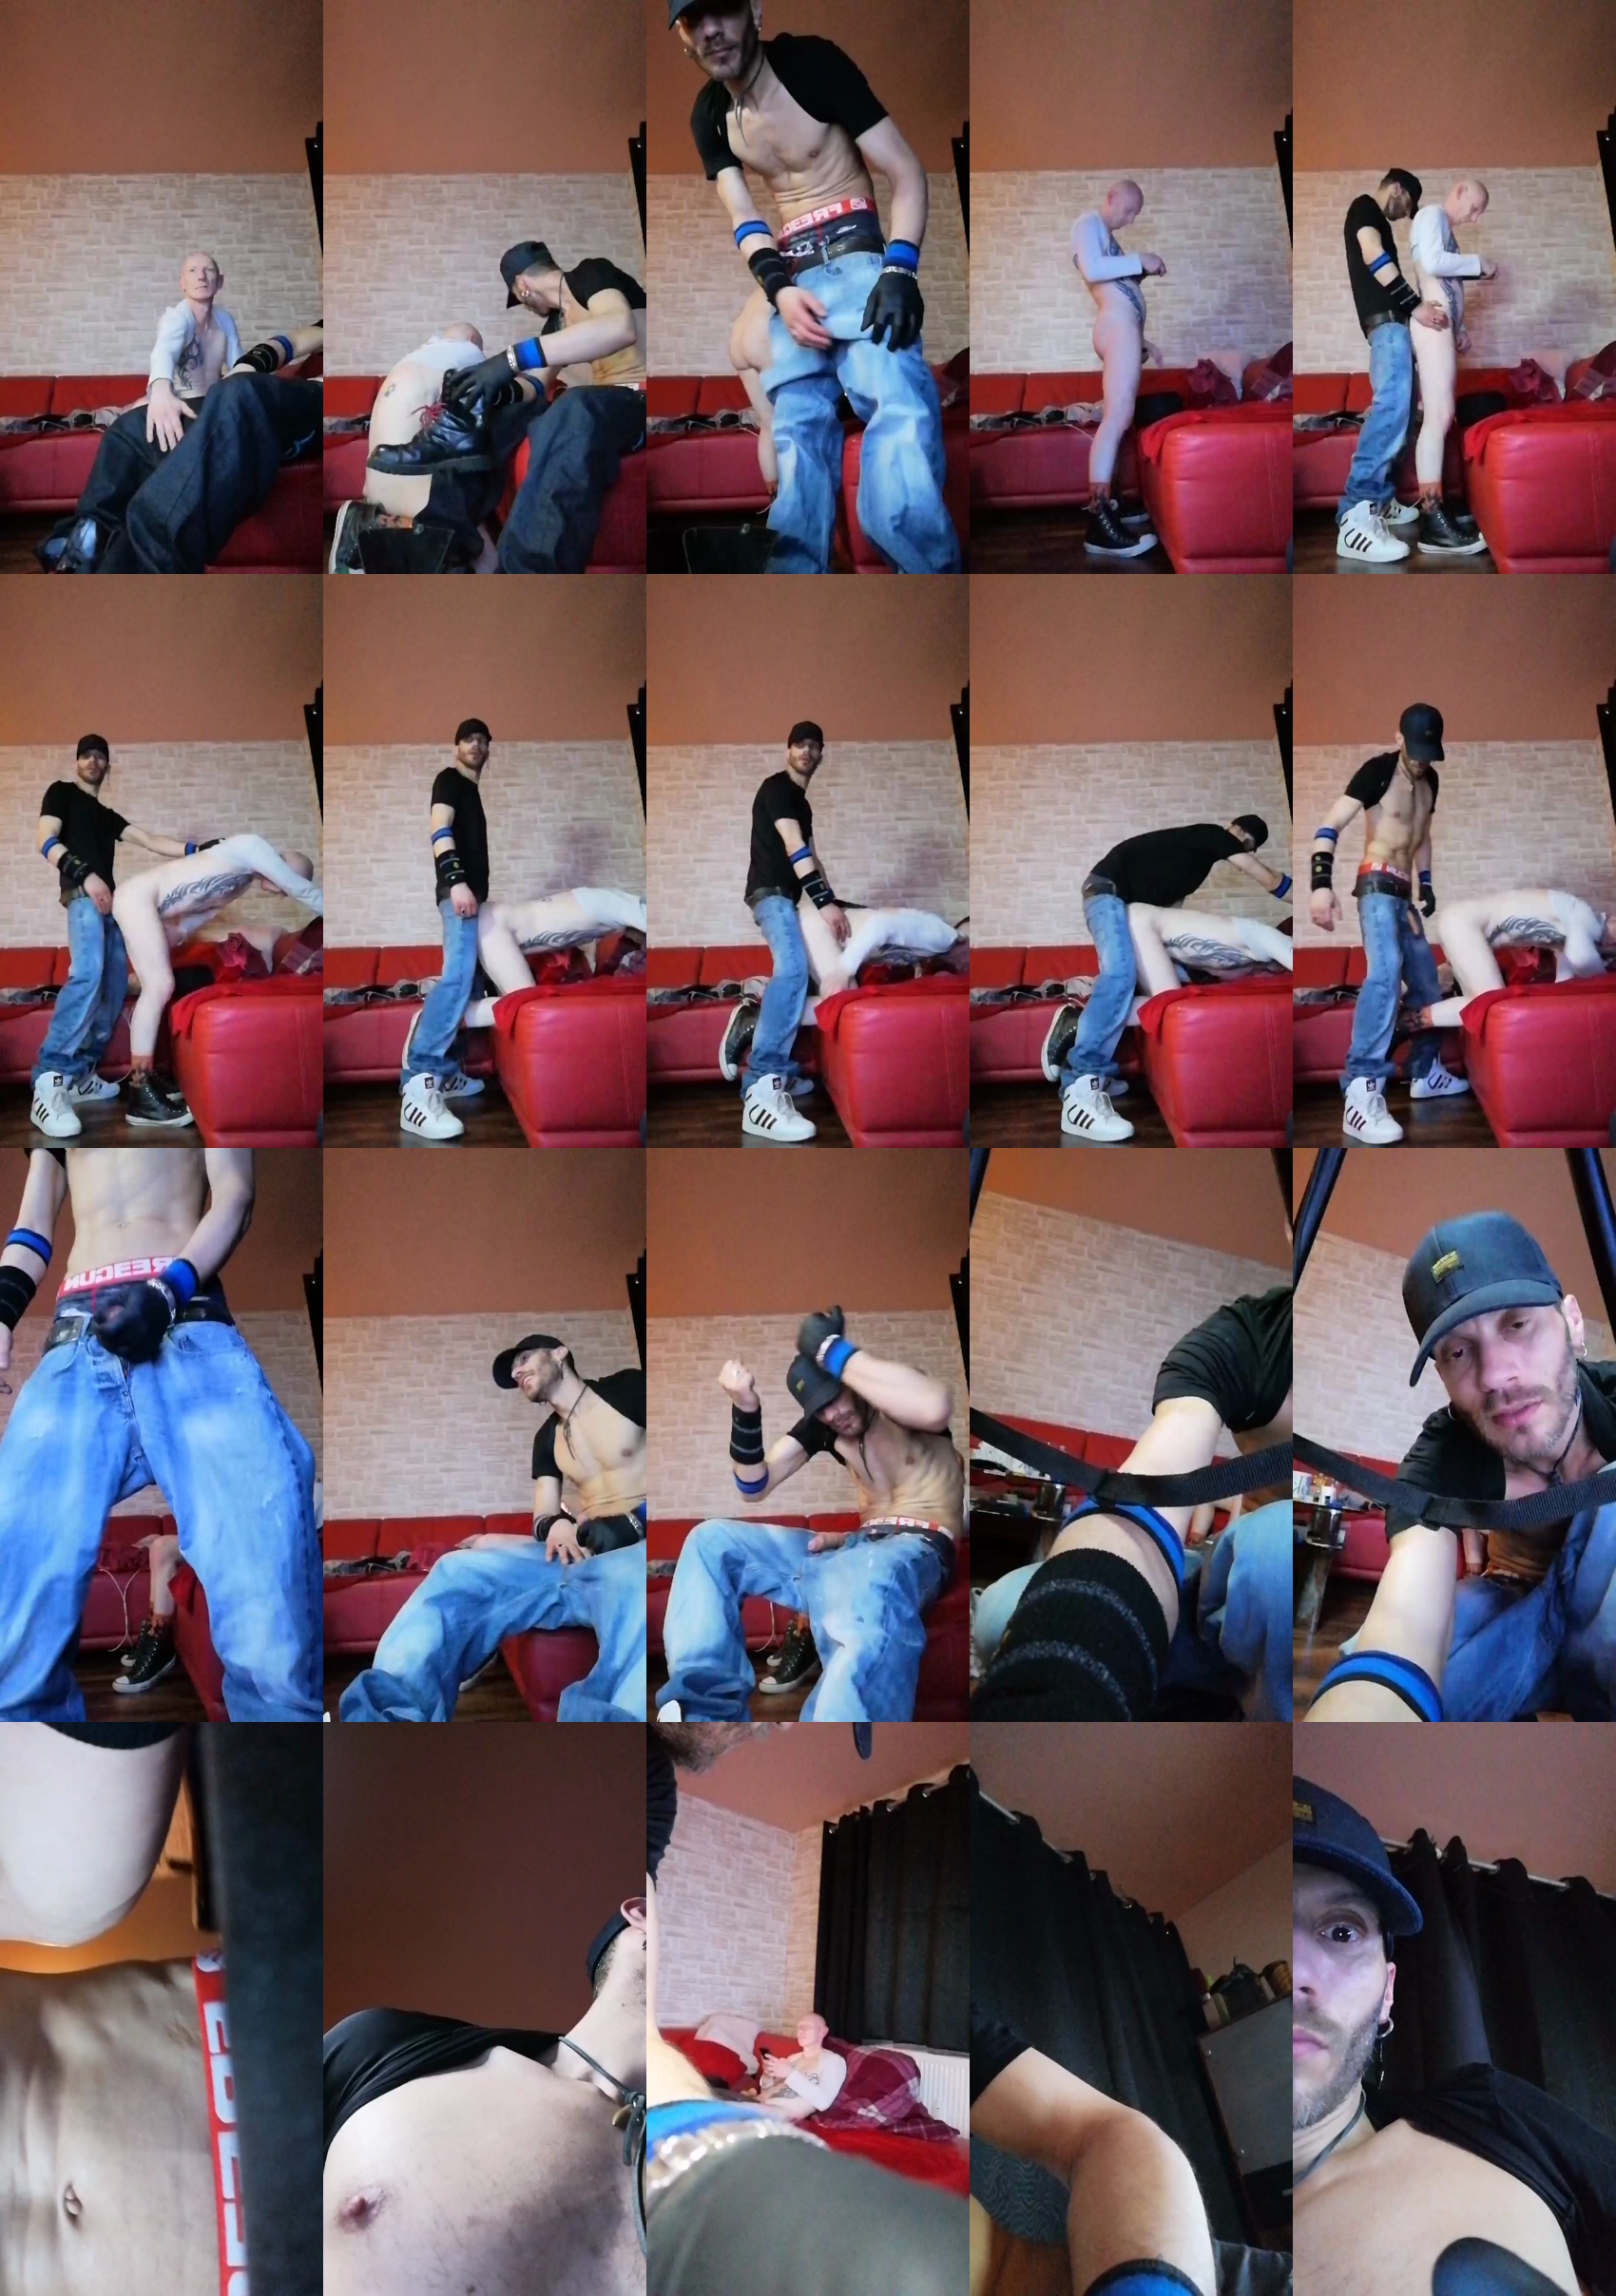 jeans_boy  03-01-2022 Recorded Video big